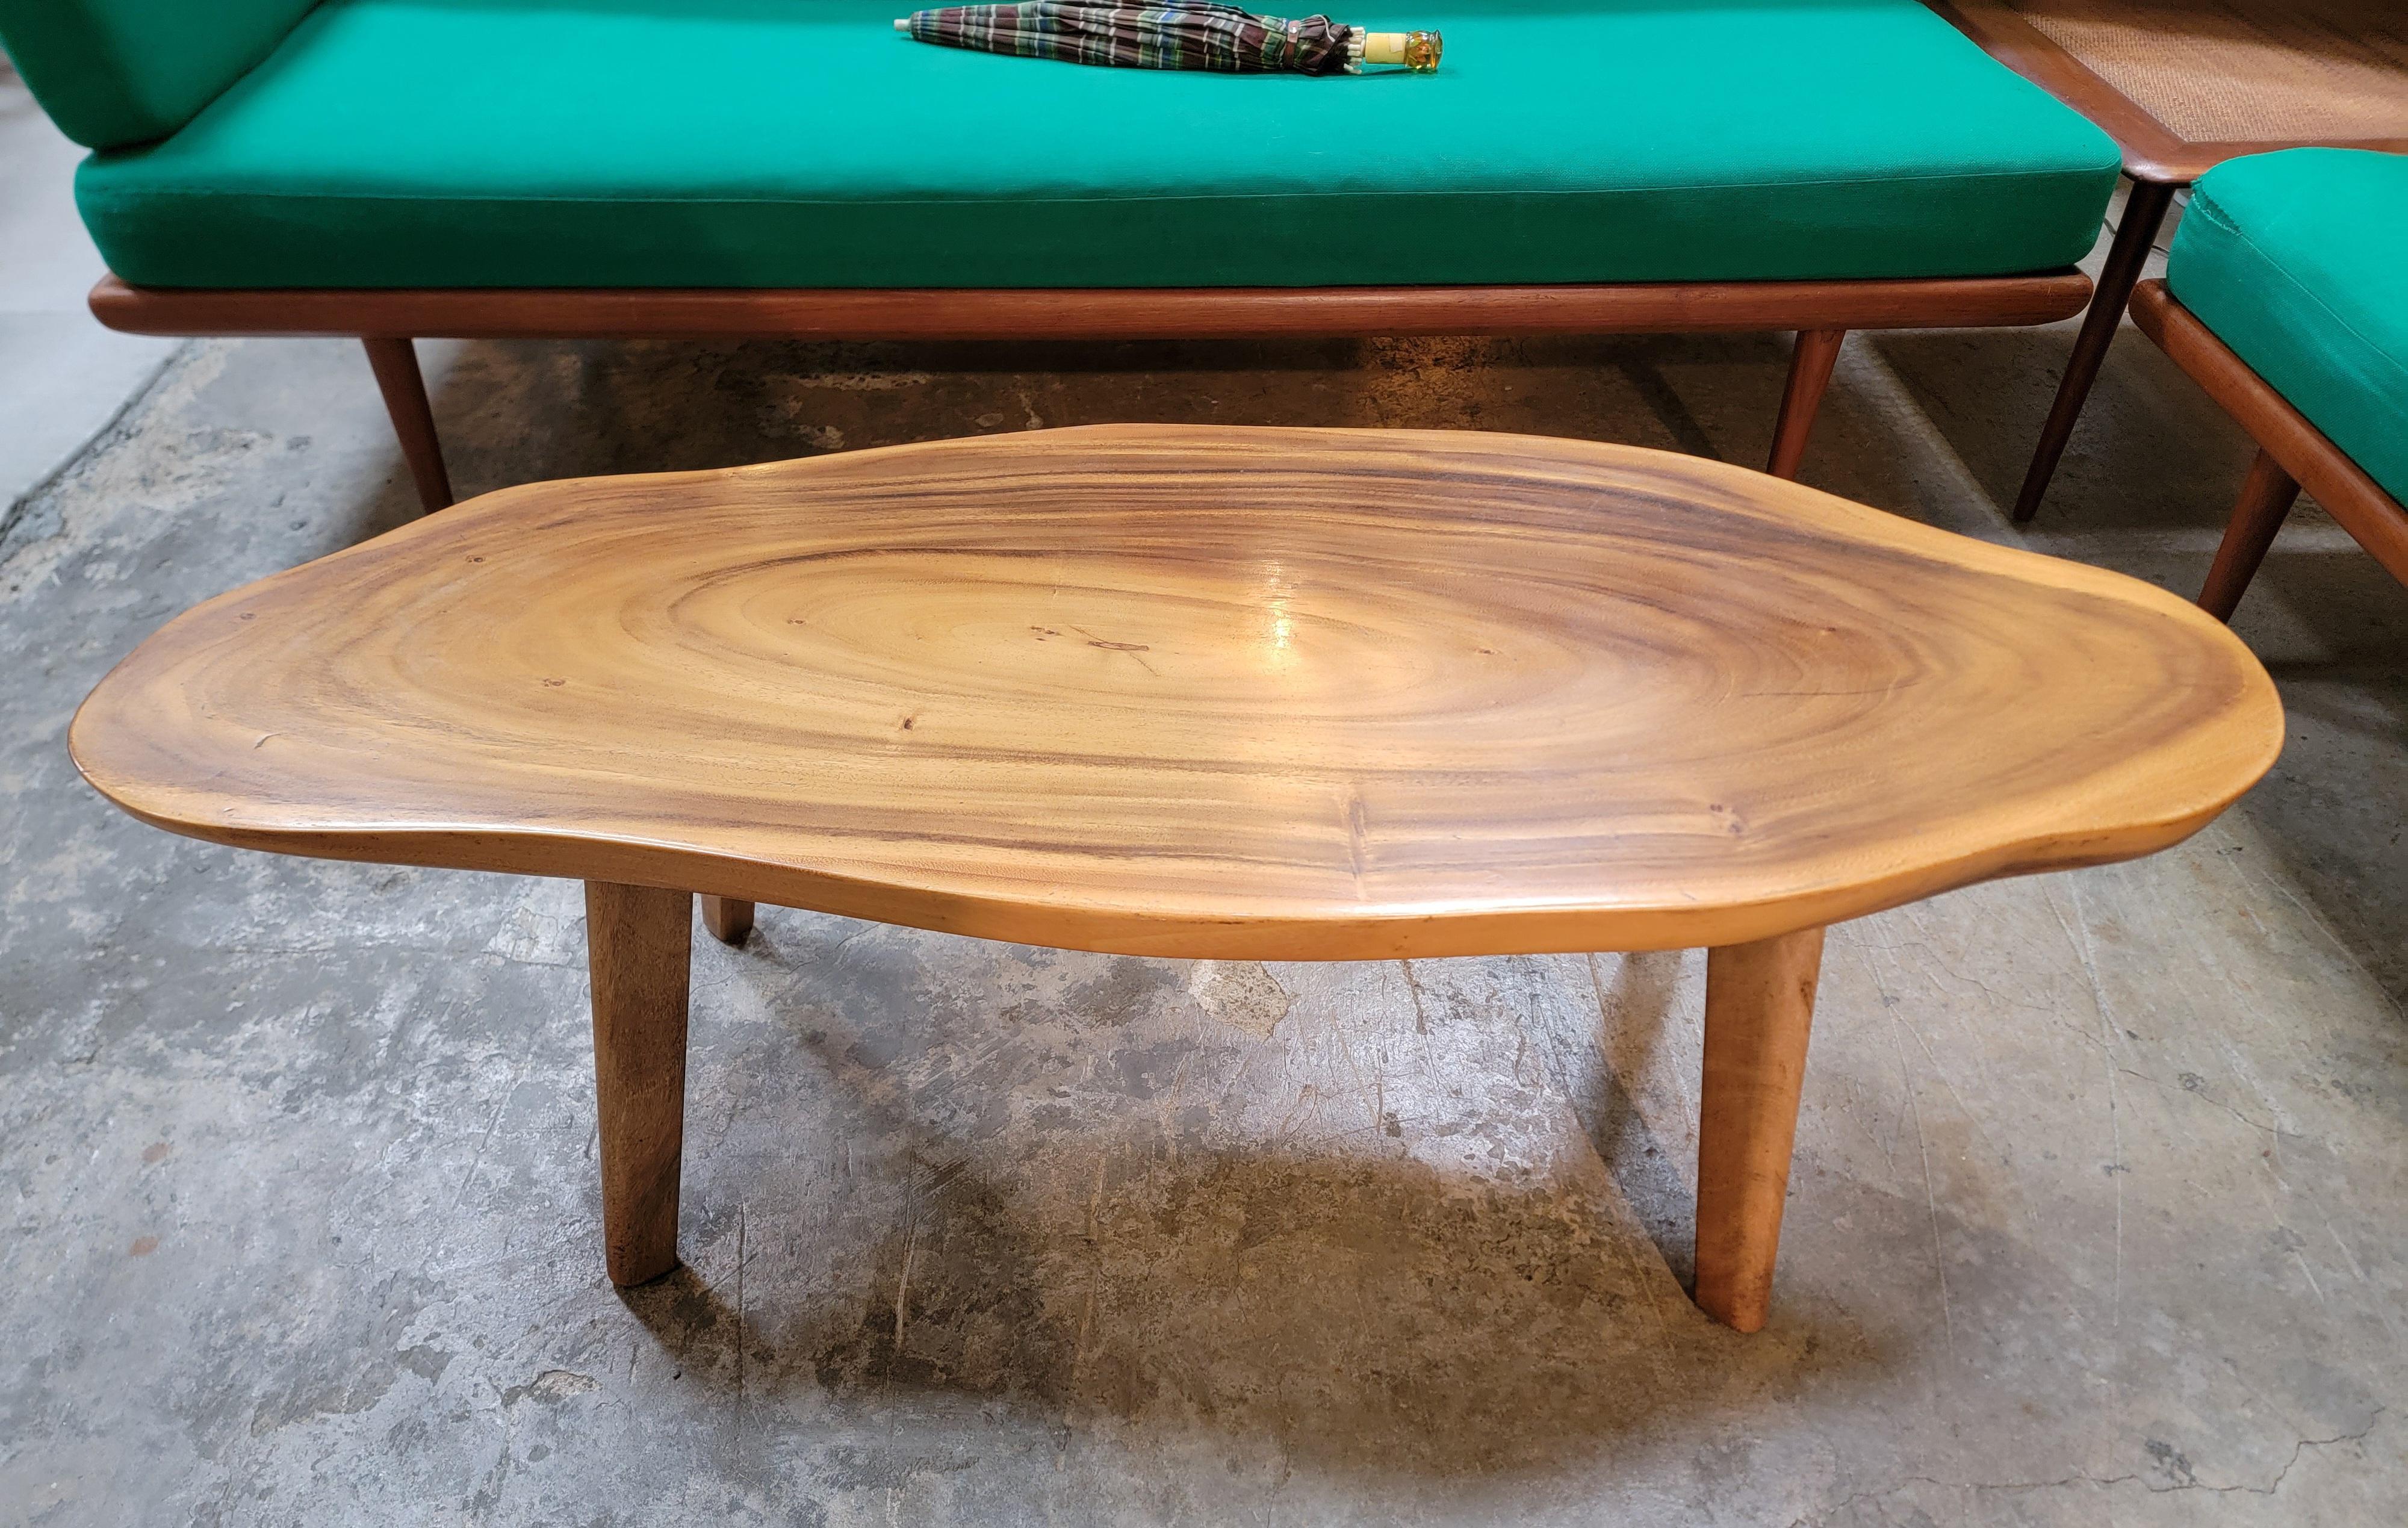 Solid slab organic modern coffee table. South Pacific ion origin. Exceptional wood grain top top of slab. Legs made of same material as top. very nice original condition. Circa. 1950's. Measures 48.5 inches wide.